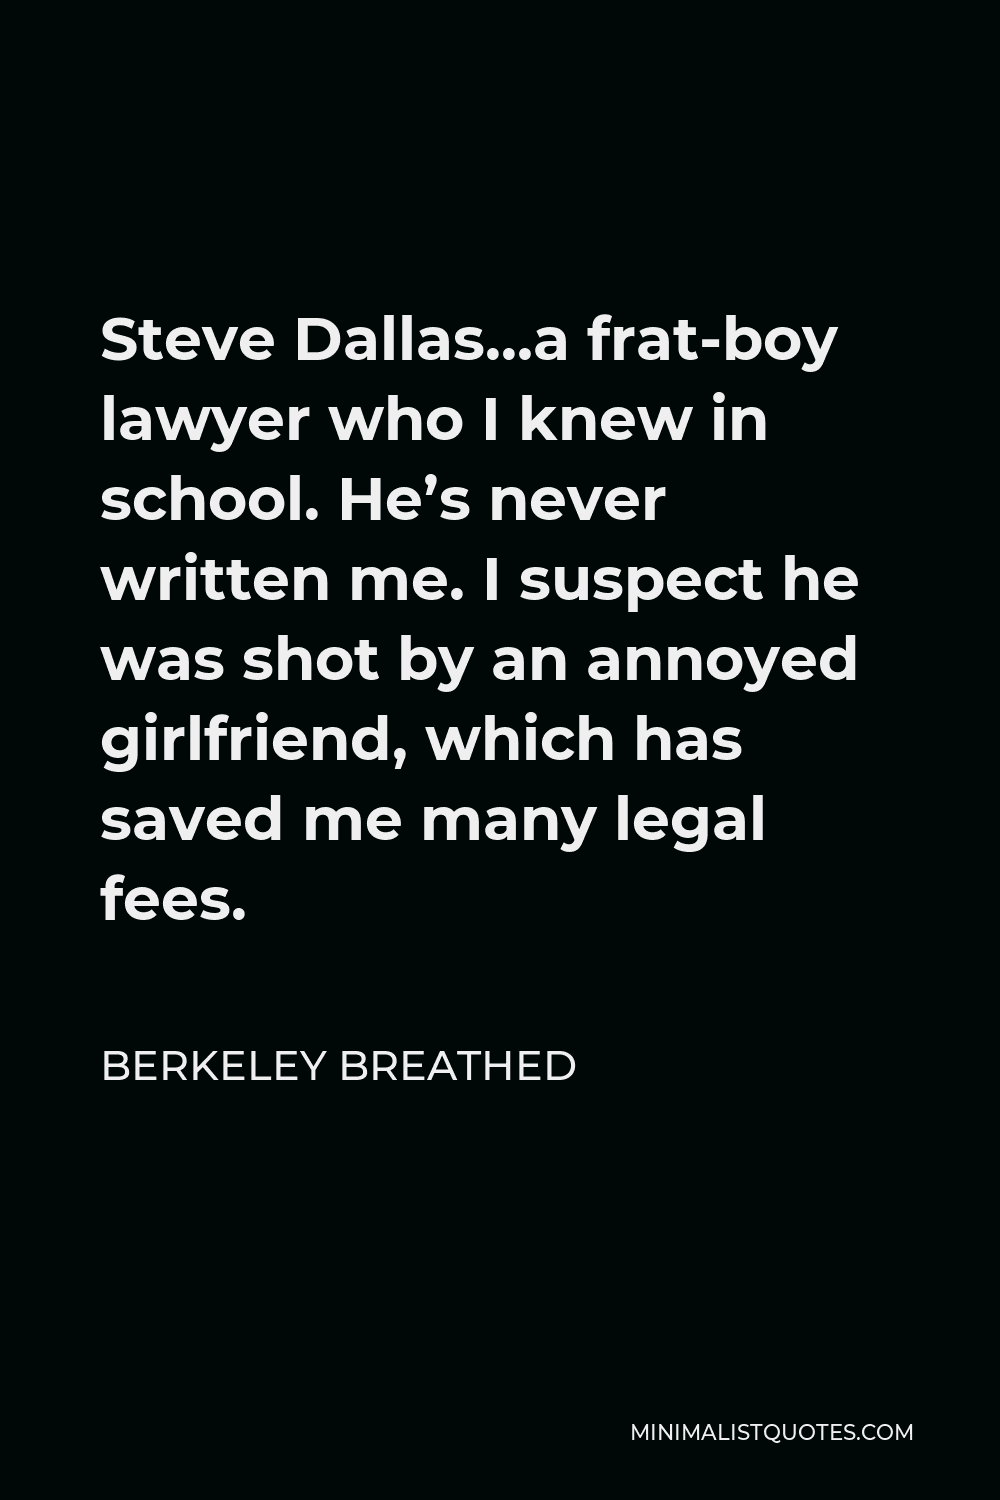 Berkeley Breathed Quote - Steve Dallas…a frat-boy lawyer who I knew in school. He’s never written me. I suspect he was shot by an annoyed girlfriend, which has saved me many legal fees.